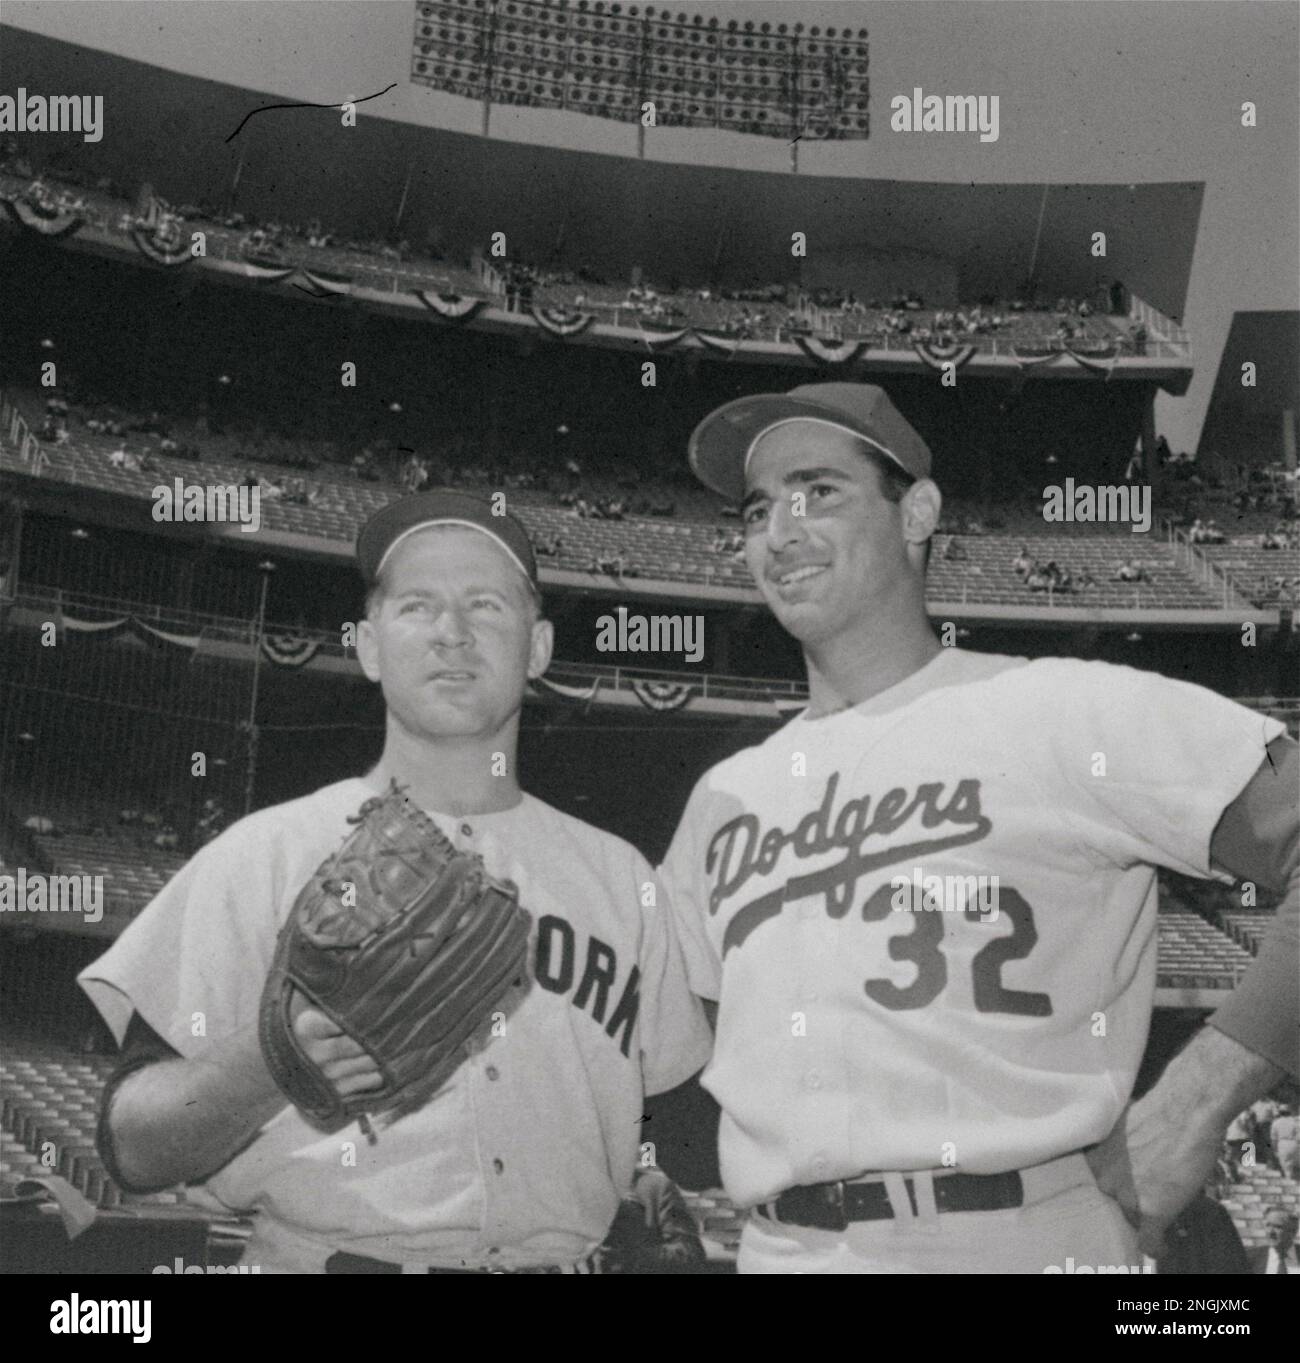 Whitey Ford, left, of the New York Yankees and Sandy Koufax of the